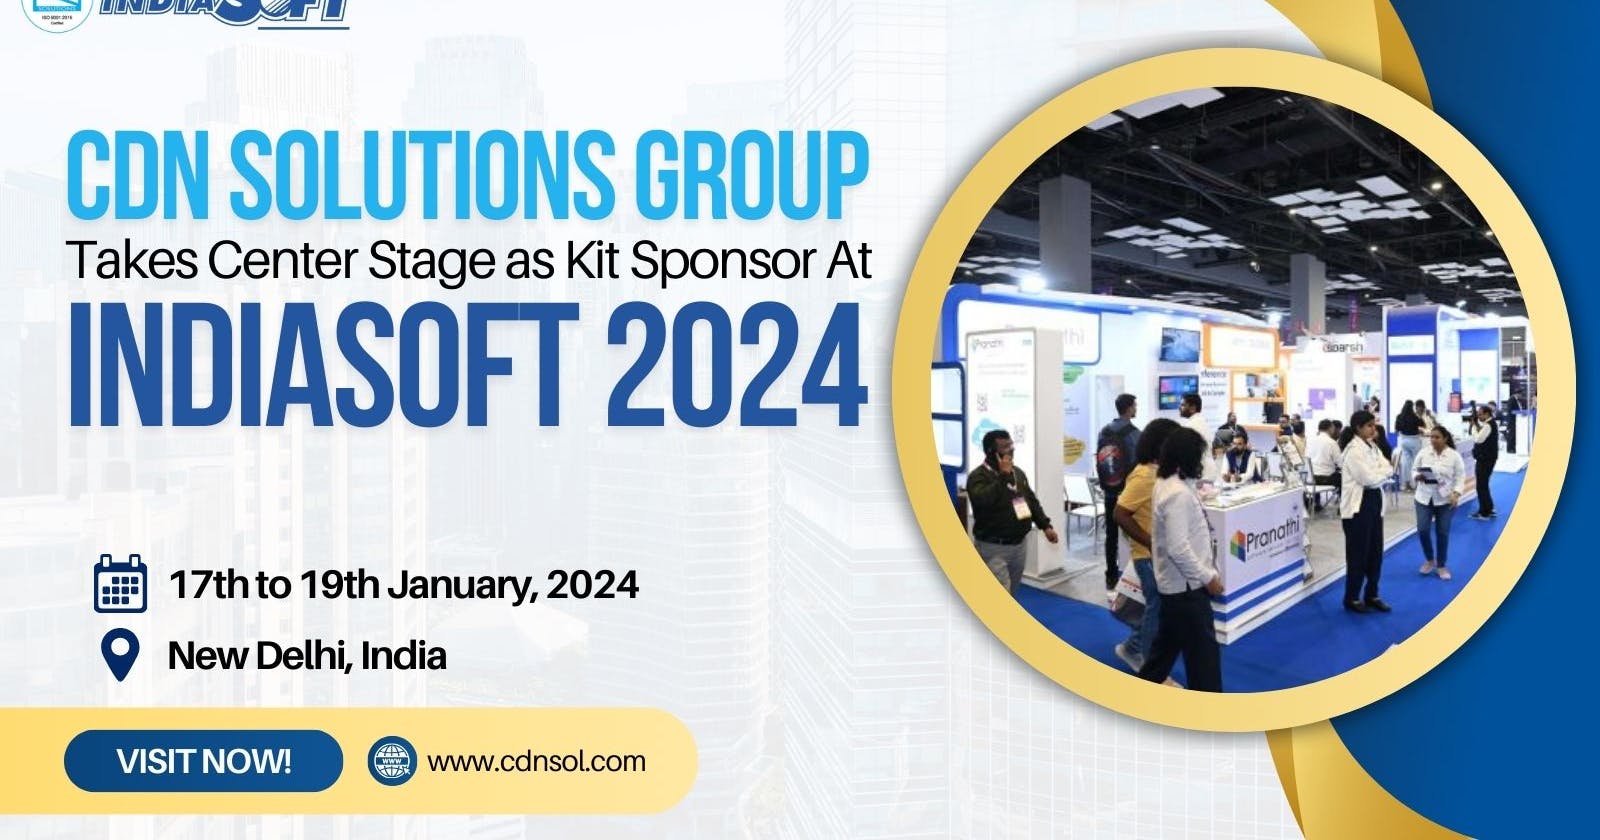 CDN Solutions Group Takes Center Stage as Kit Sponsor at IndiaSoft 2024